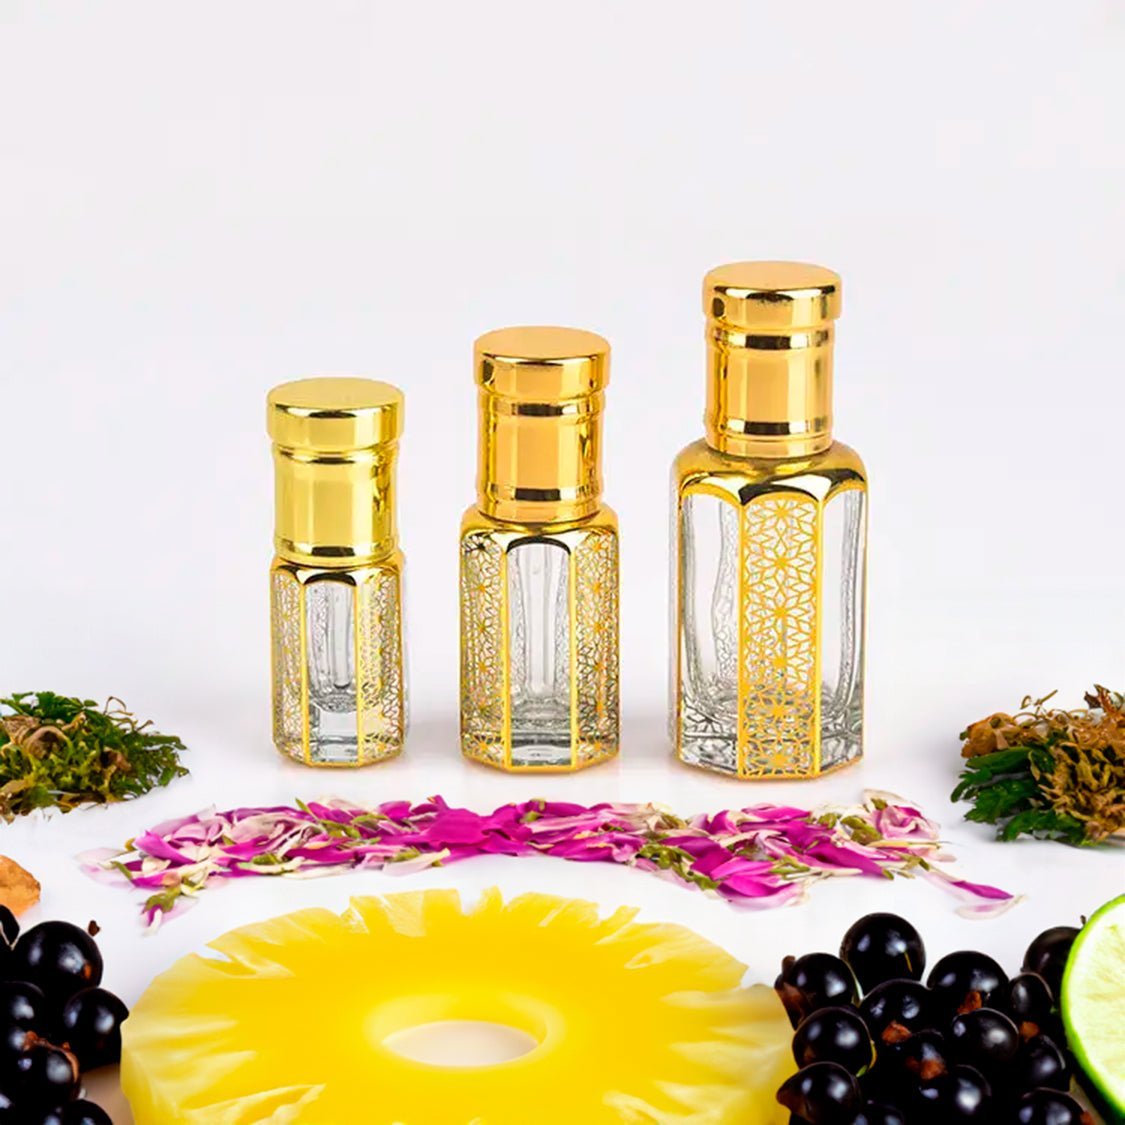 Flora Five Aventus Creed inspired fragrance attar bottles displayed in three sizes with intricate golden designs. Surrounded by natural ingredients including pineapple slices, black currants, floral petals, and greenery, this long-lasting and charming attar embodies luxury and elegance. Perfect for those seeking a captivating and enduring scent.